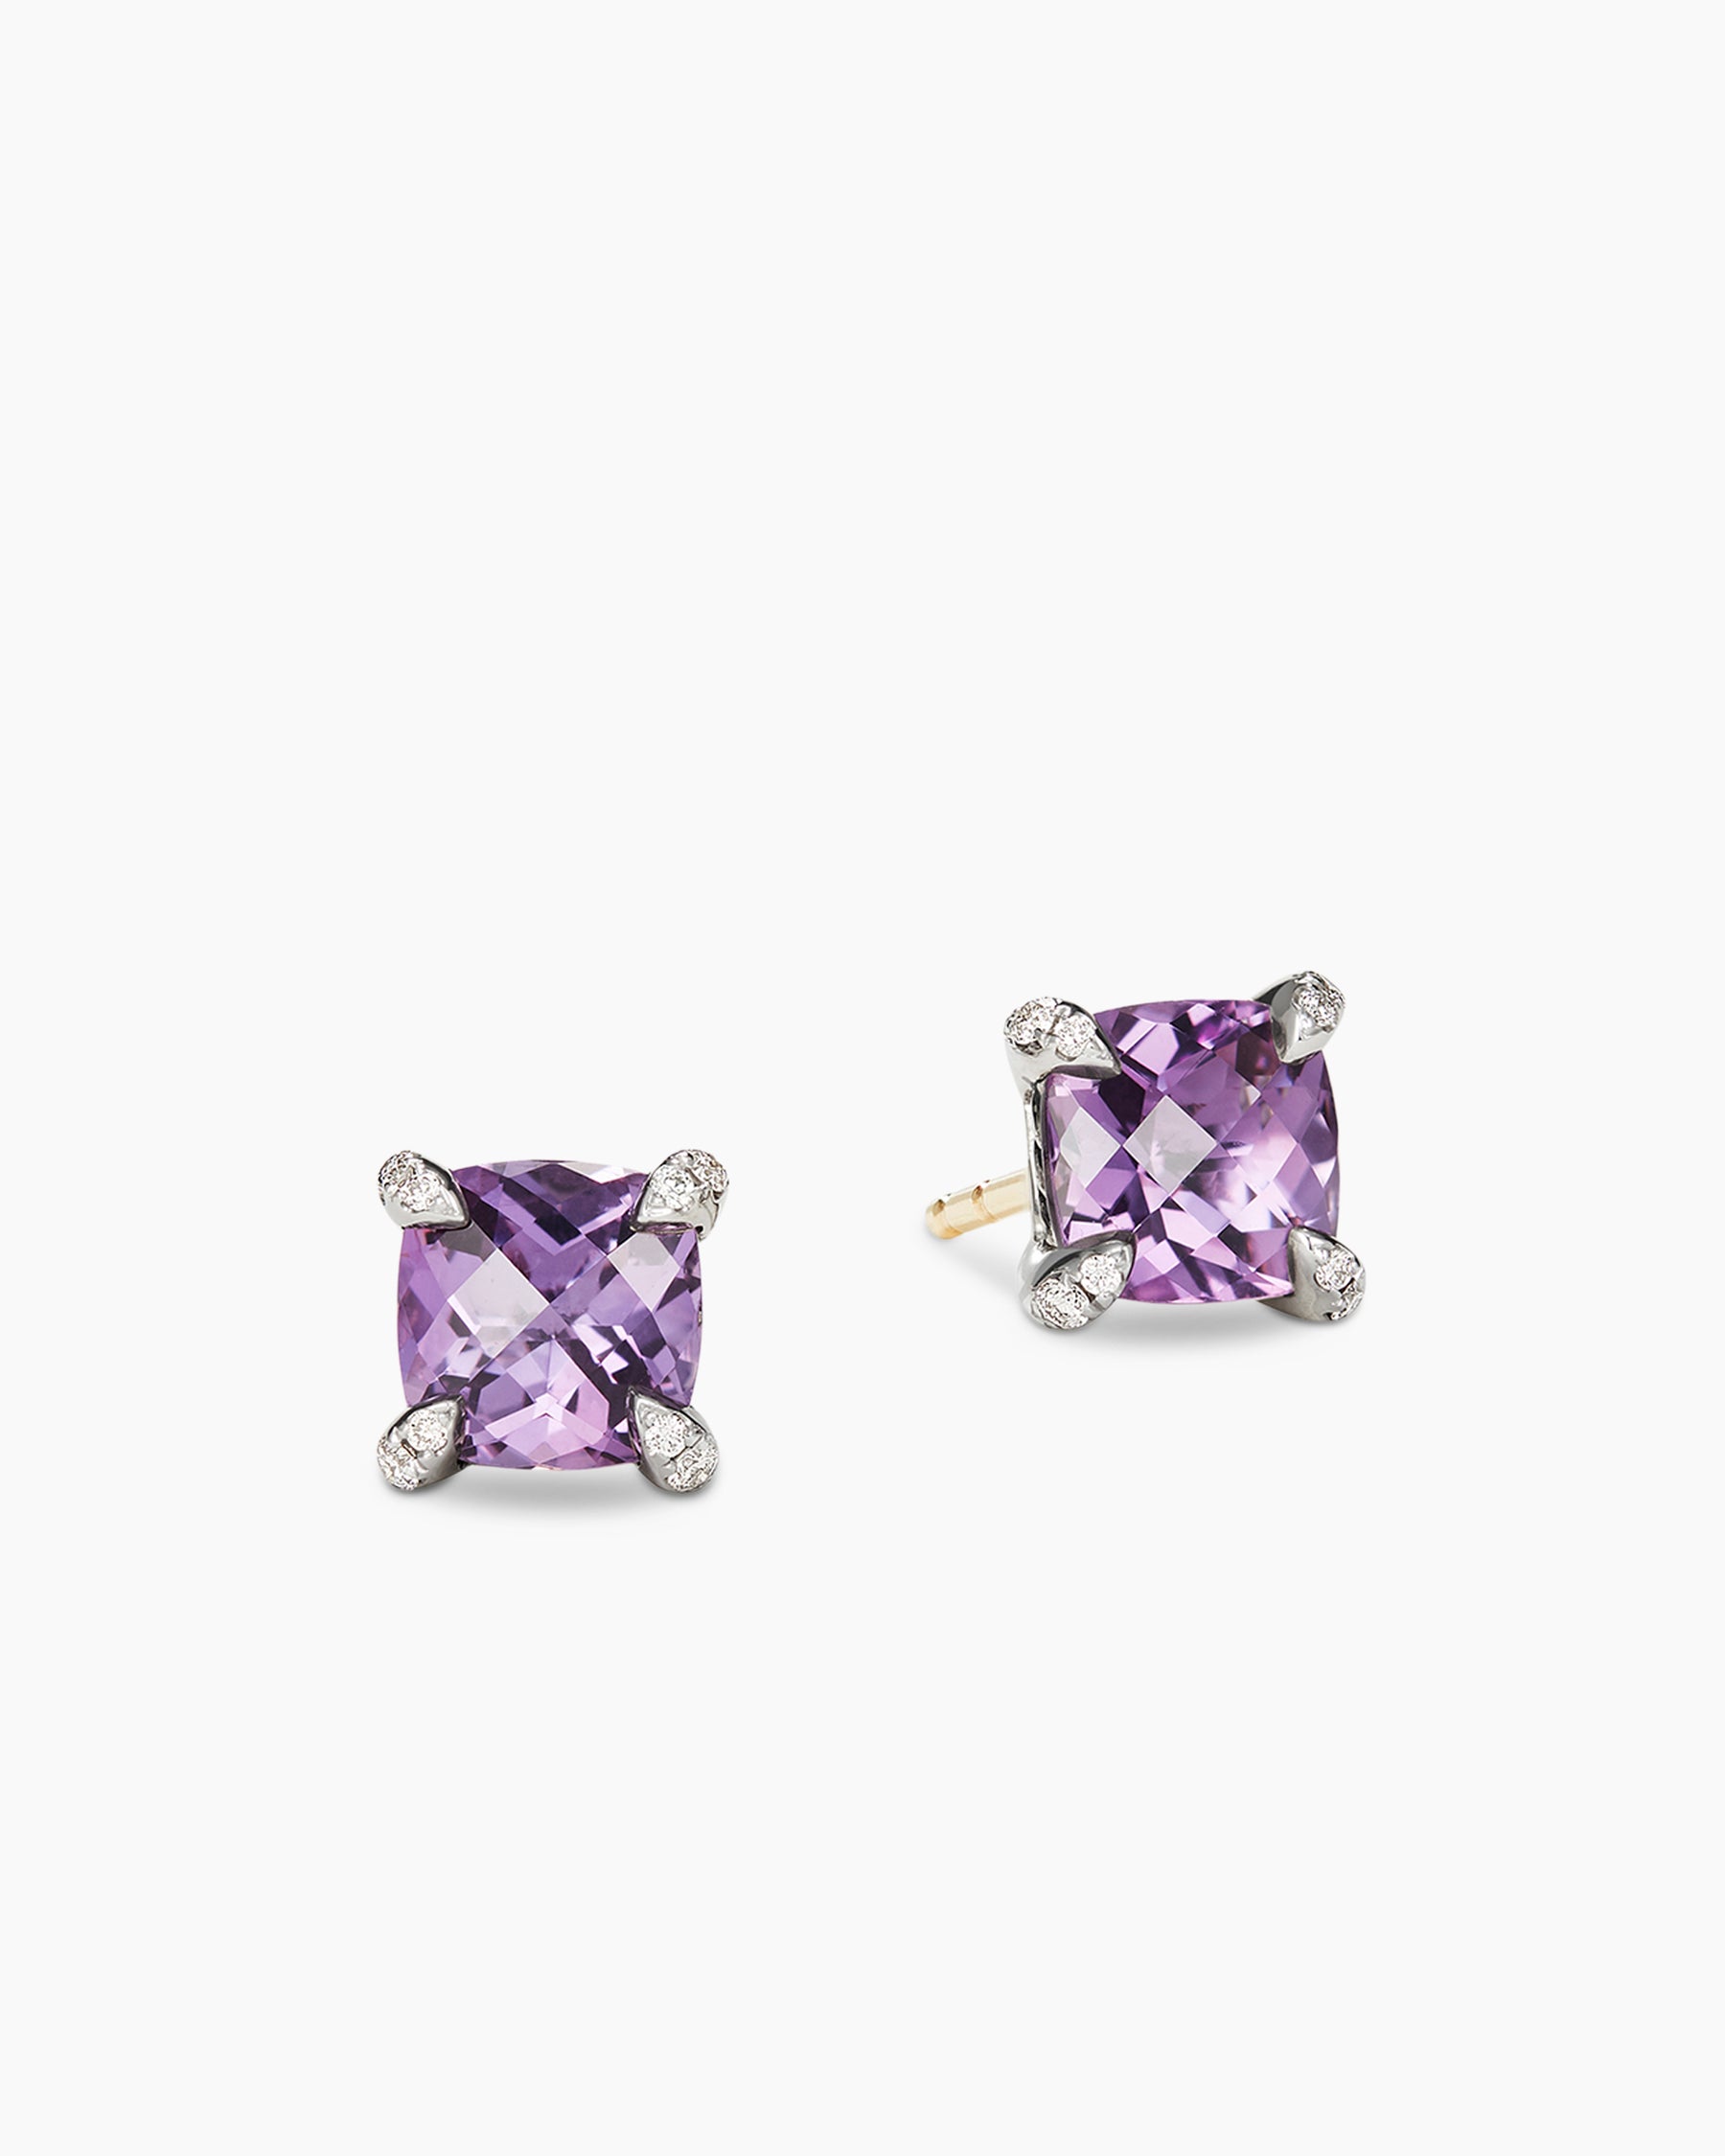 Petite Chatelaine® Stud Earrings in Sterling Silver with Amethyst and  Diamonds, 6mm | David Yurman